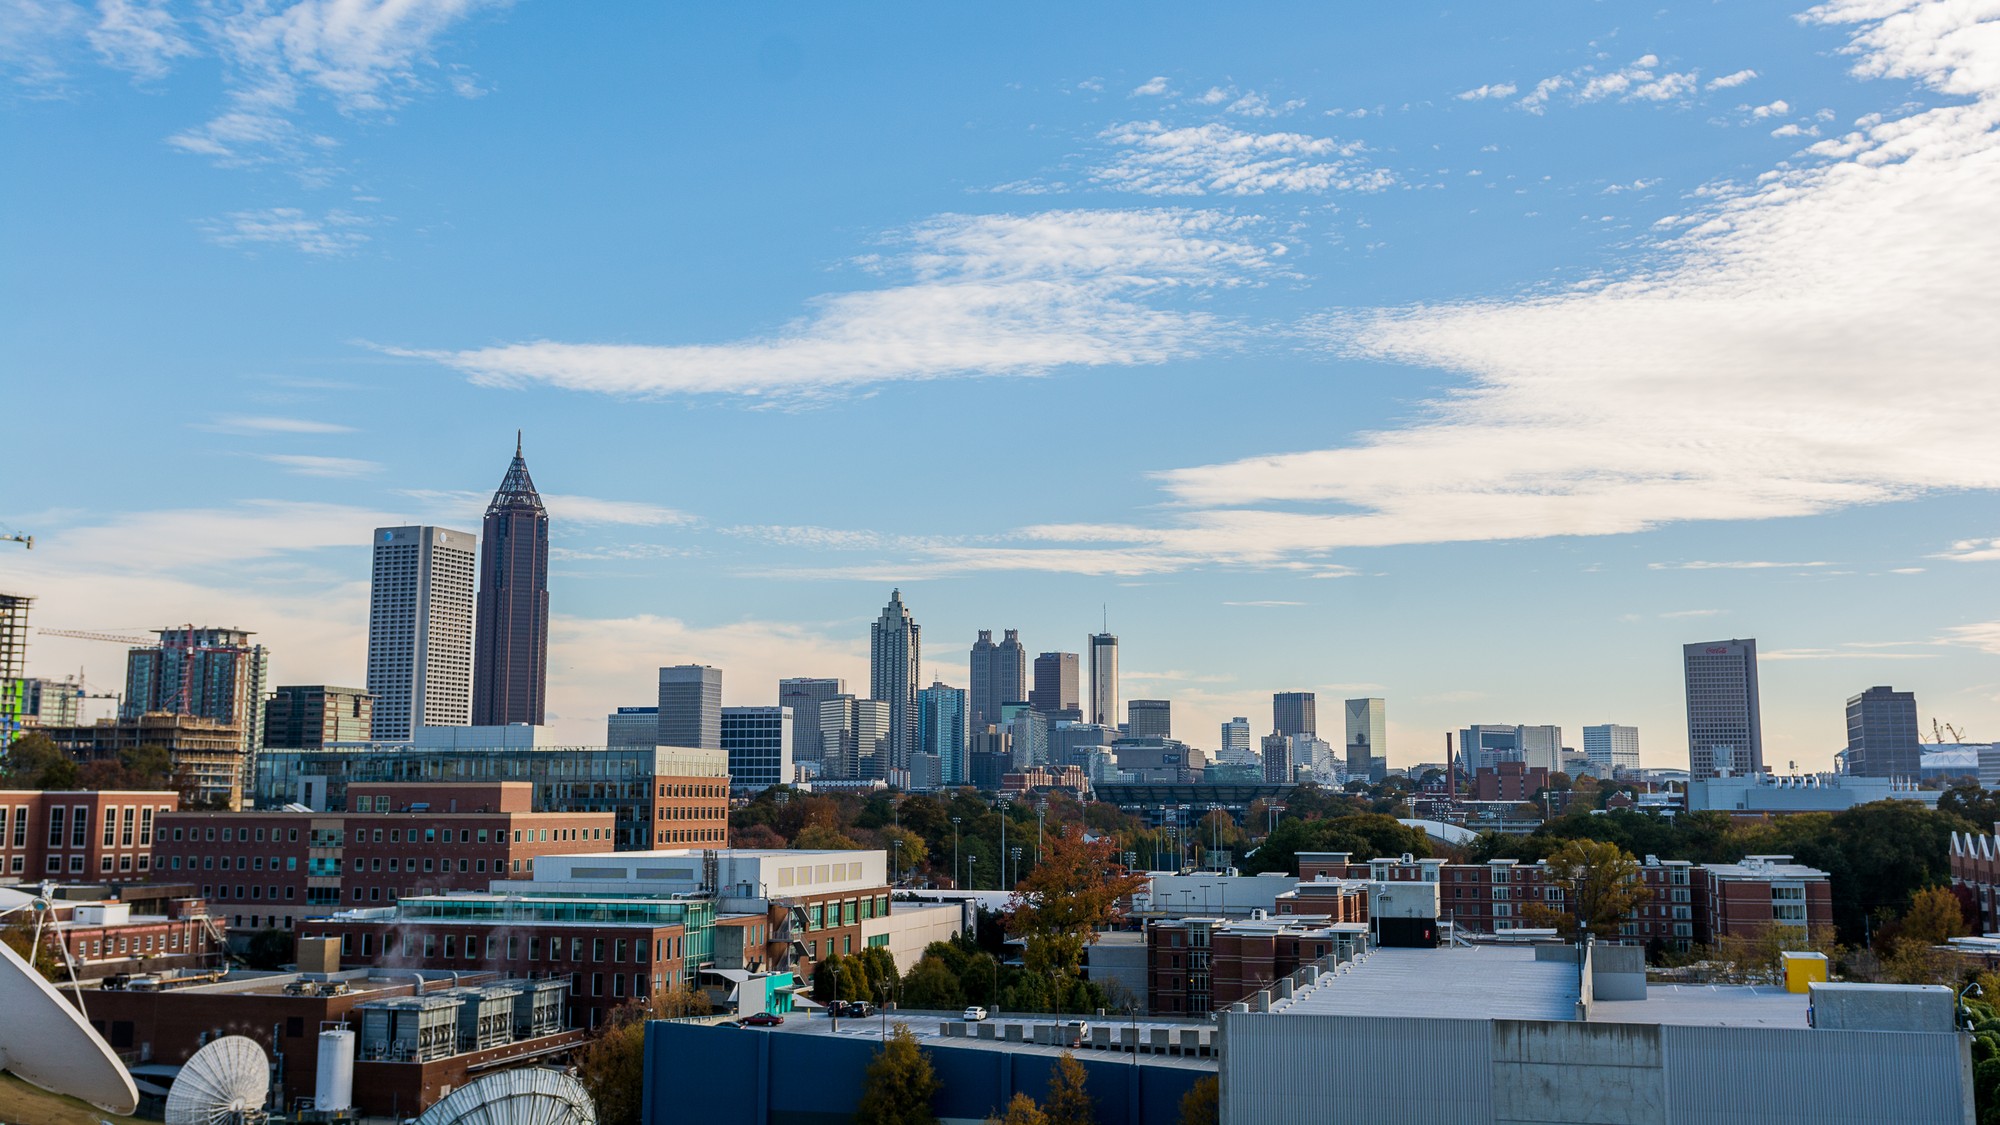 Downtown Atlanta voted ‘Best Day Trip’ by Kennesaw campus